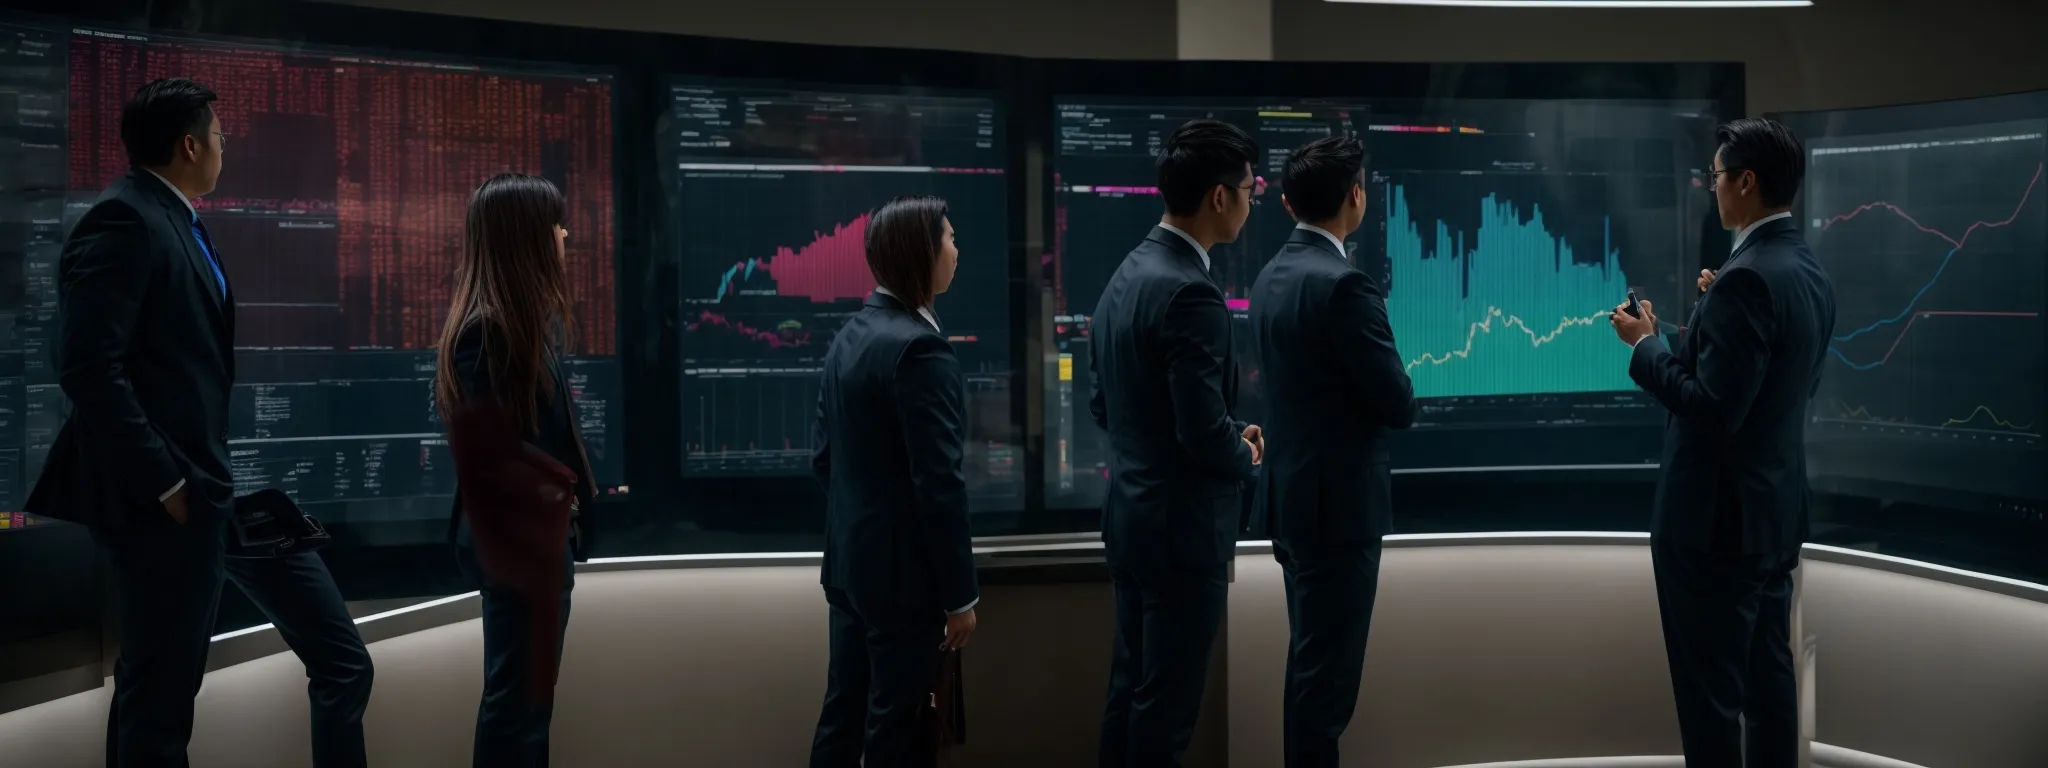 a group of professionals standing around a large touchscreen display, interacting with a colorful data dashboard pertinent to their industry.